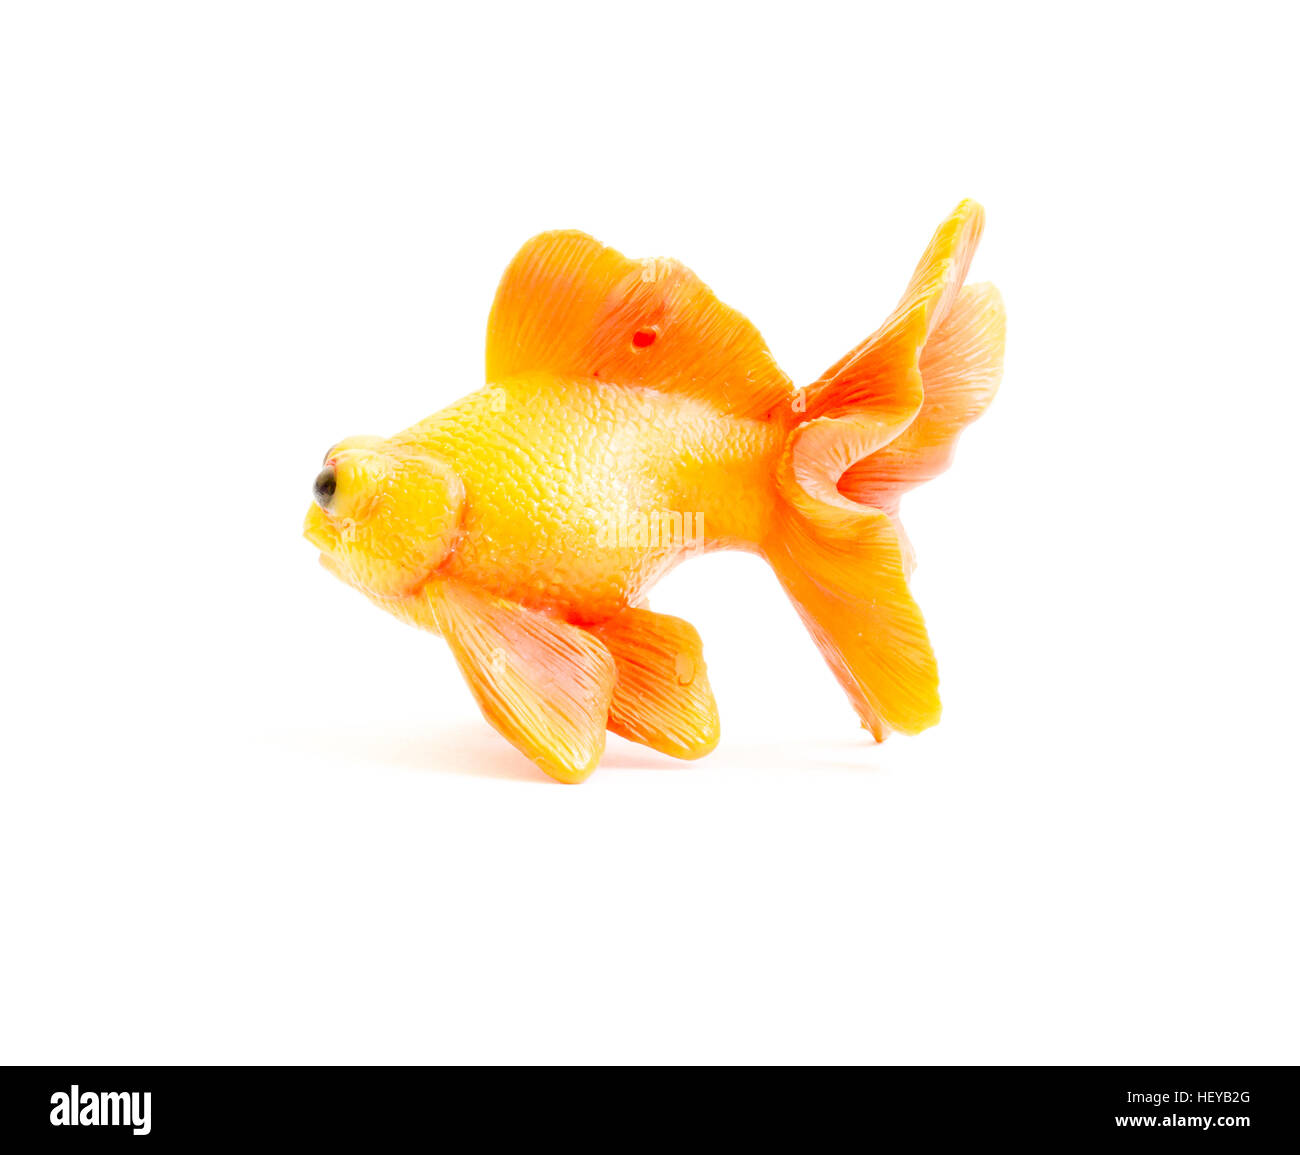 The Miniature toy gold fish. Stock Photo